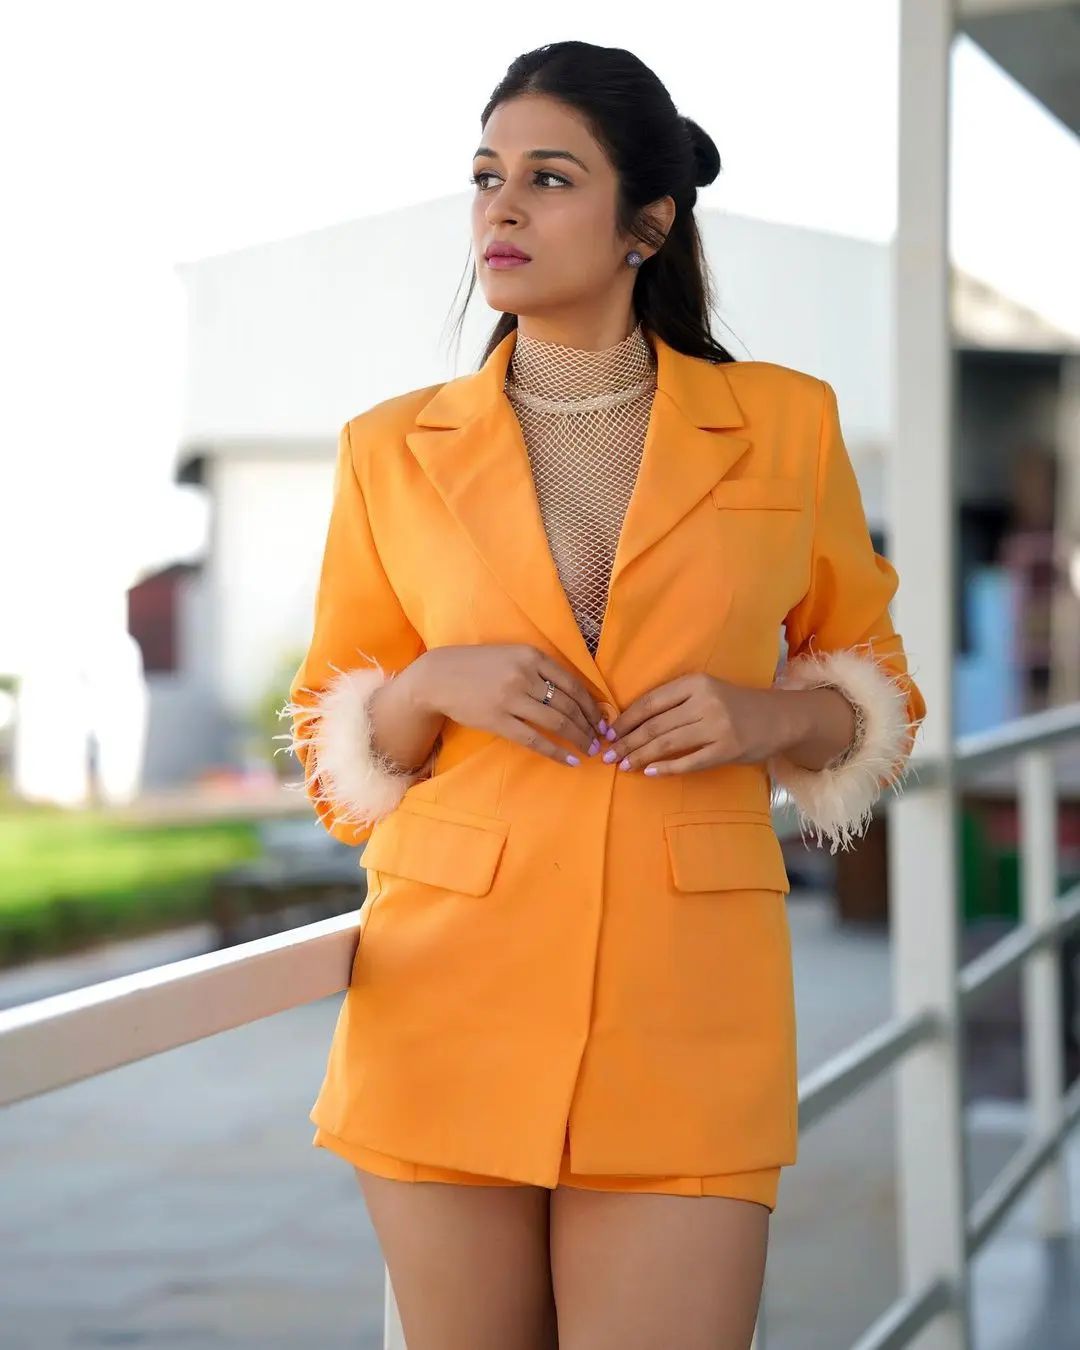 Shraddha Das sizzles in orange color modern outfit